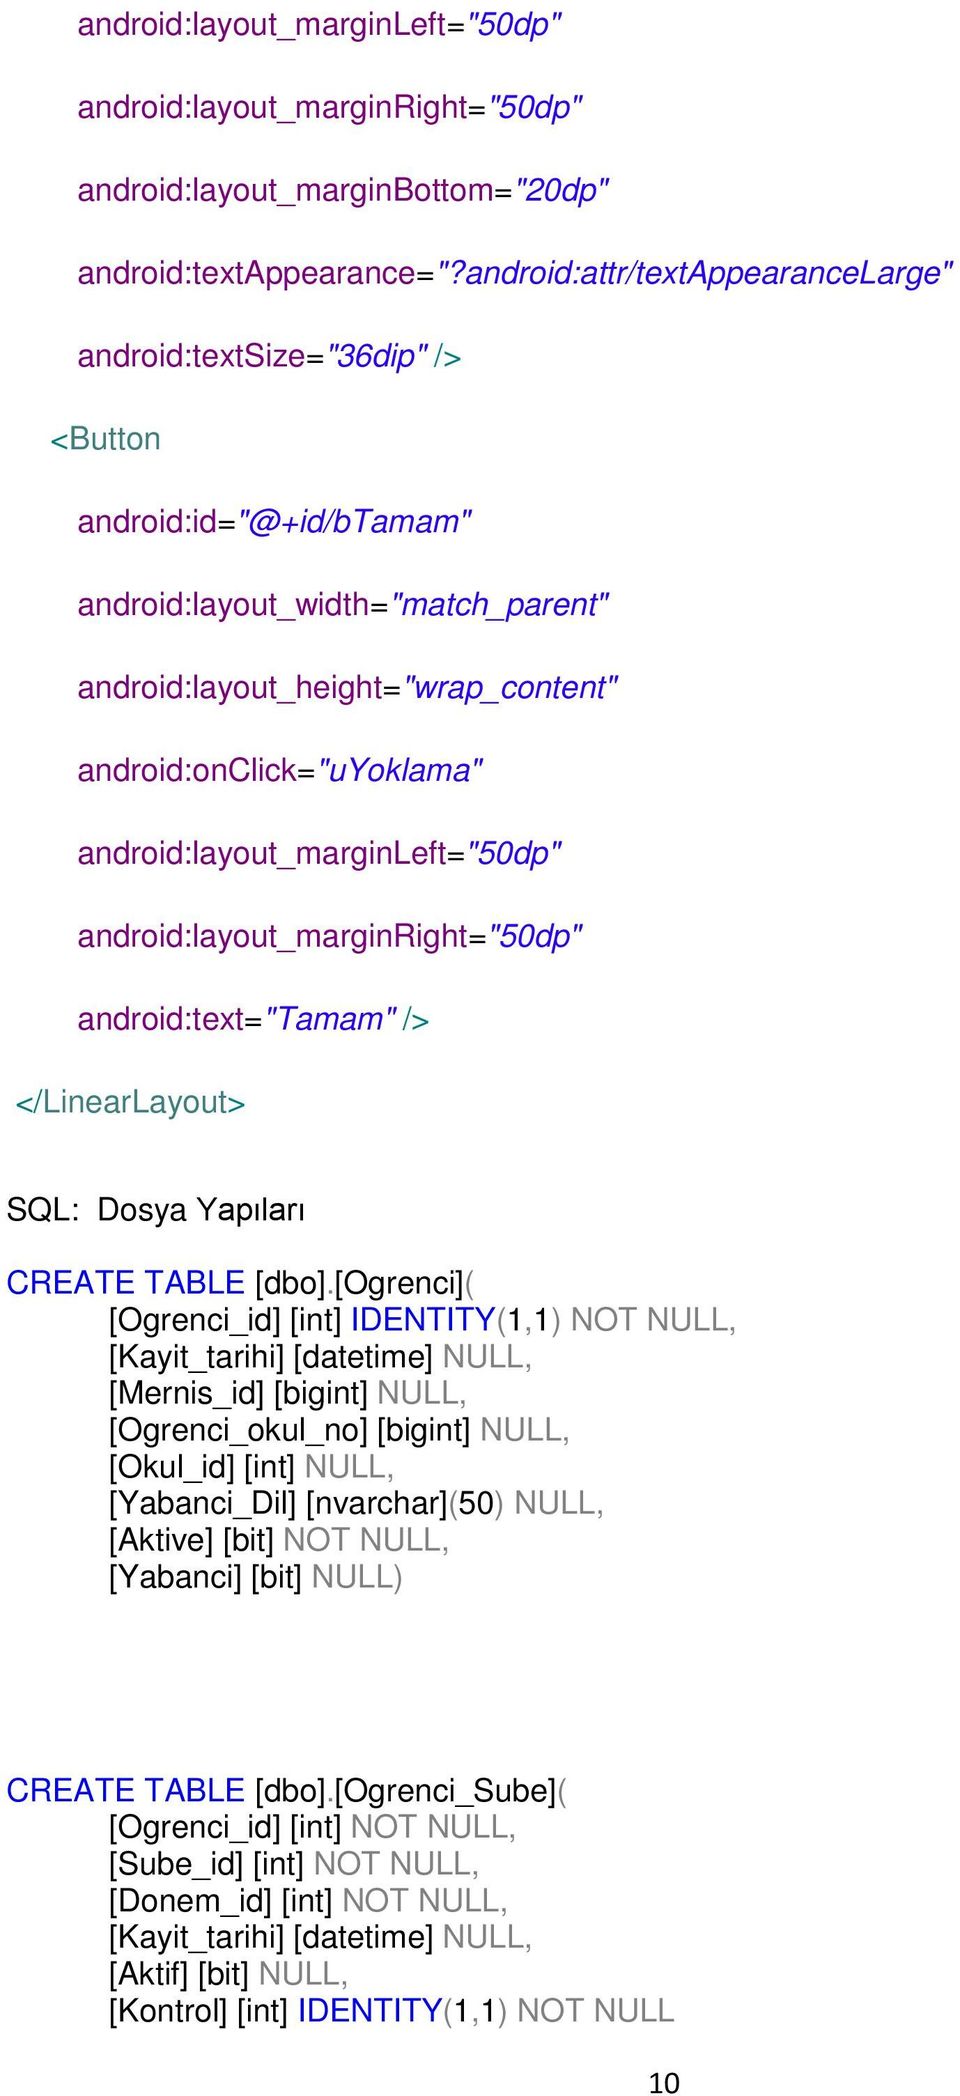 android:layout_marginleft="50dp" android:layout_marginright="50dp" android:text="tamam" /> </LinearLayout> SQL: Dosya Yapıları CREATE TABLE [dbo].